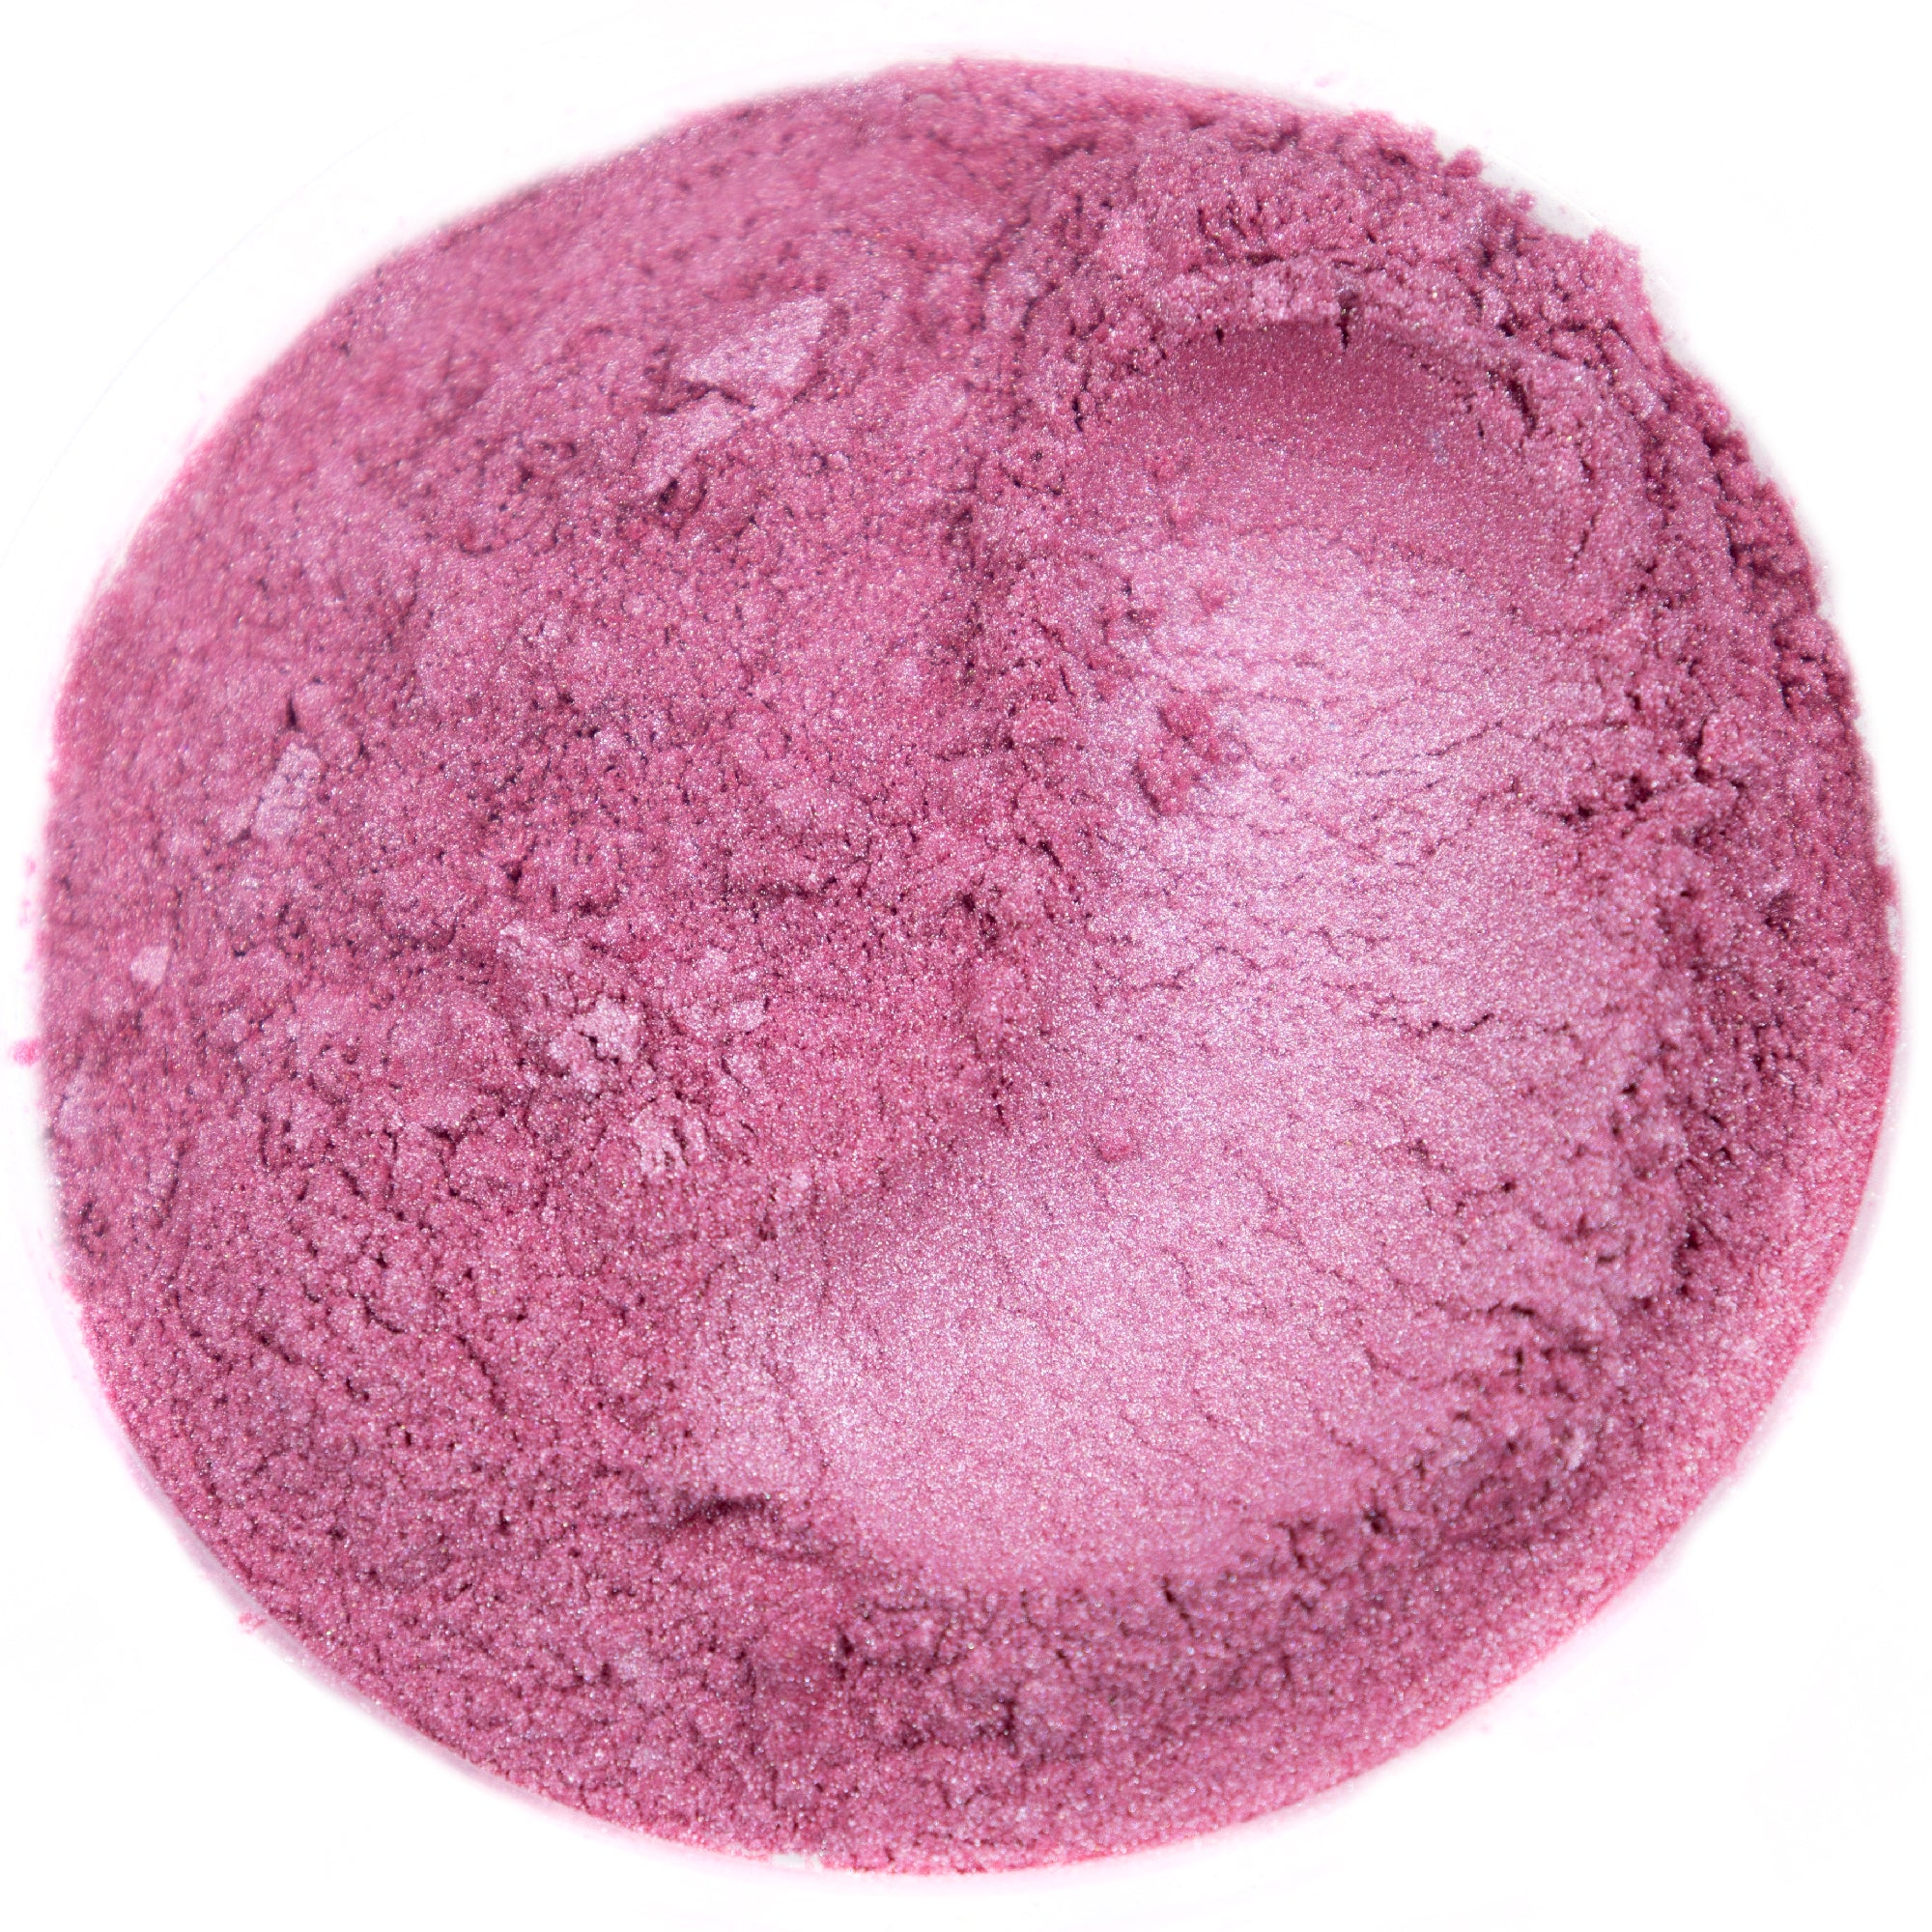 Rolio mica powder creamy pink 50g for epoxy resin, candle, cosmetic making  • Price »